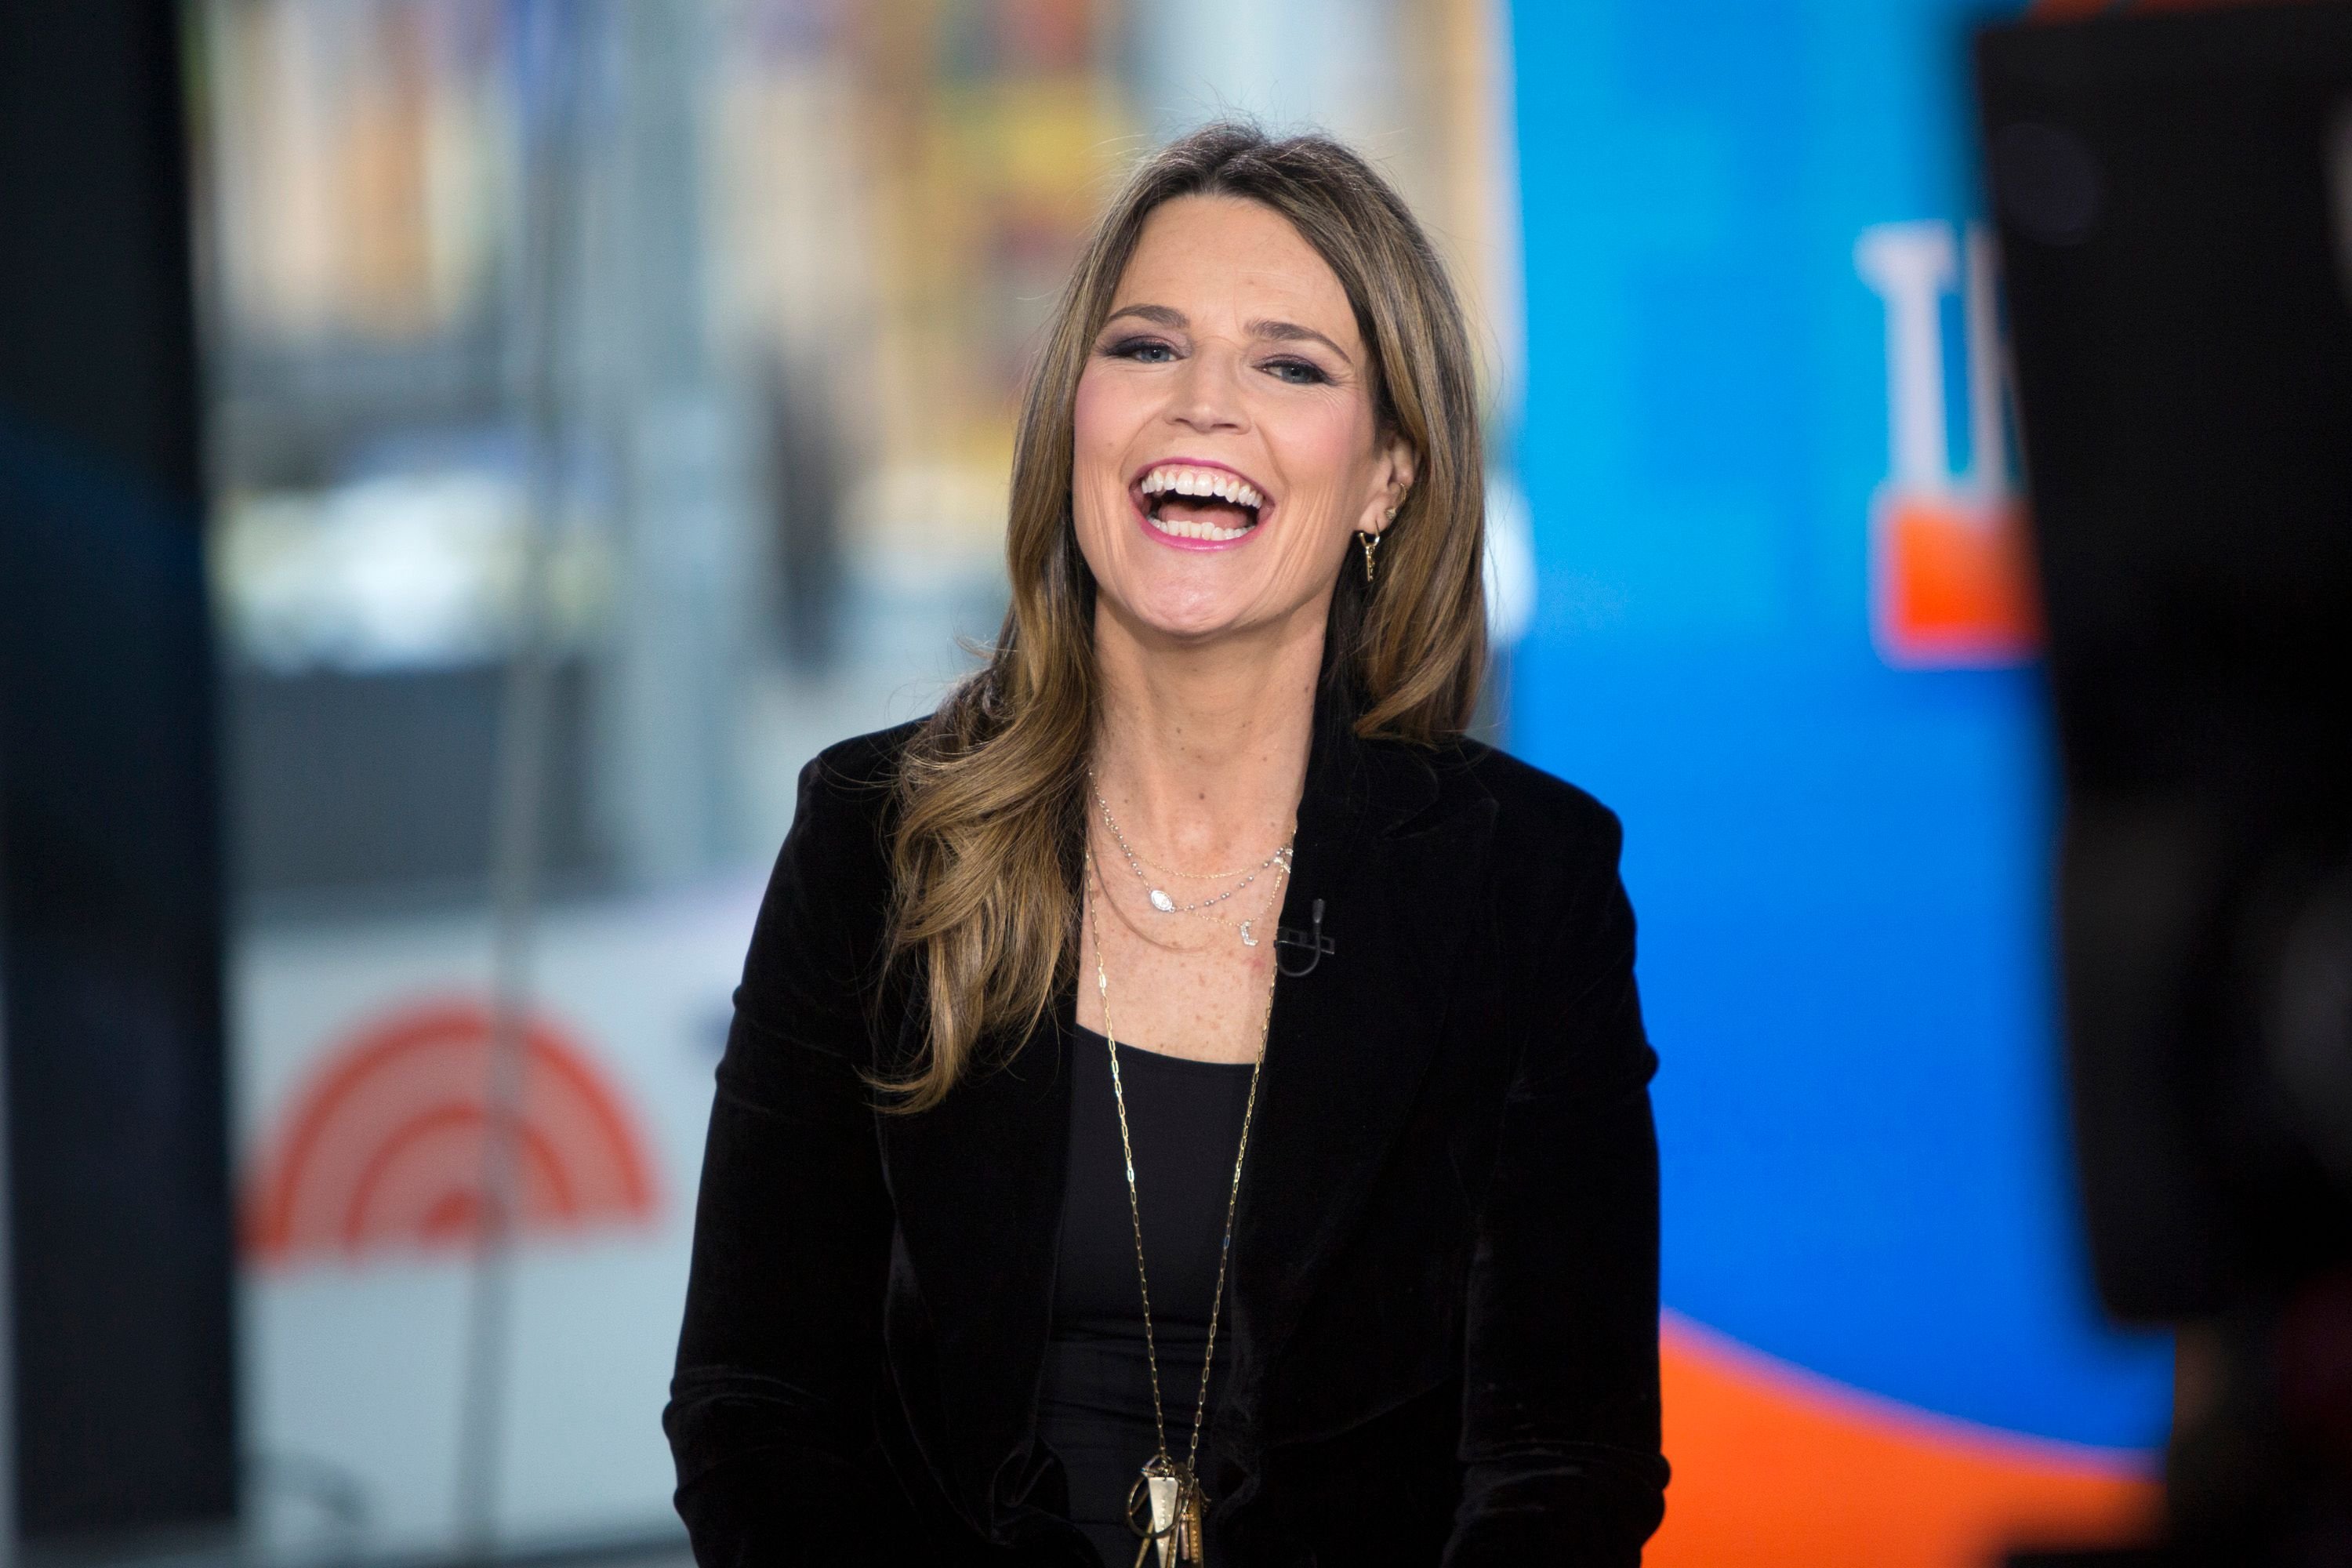 Savannah Guthrie on the set of the "Today" show on January 9, 2018. | Photo: Getty Images